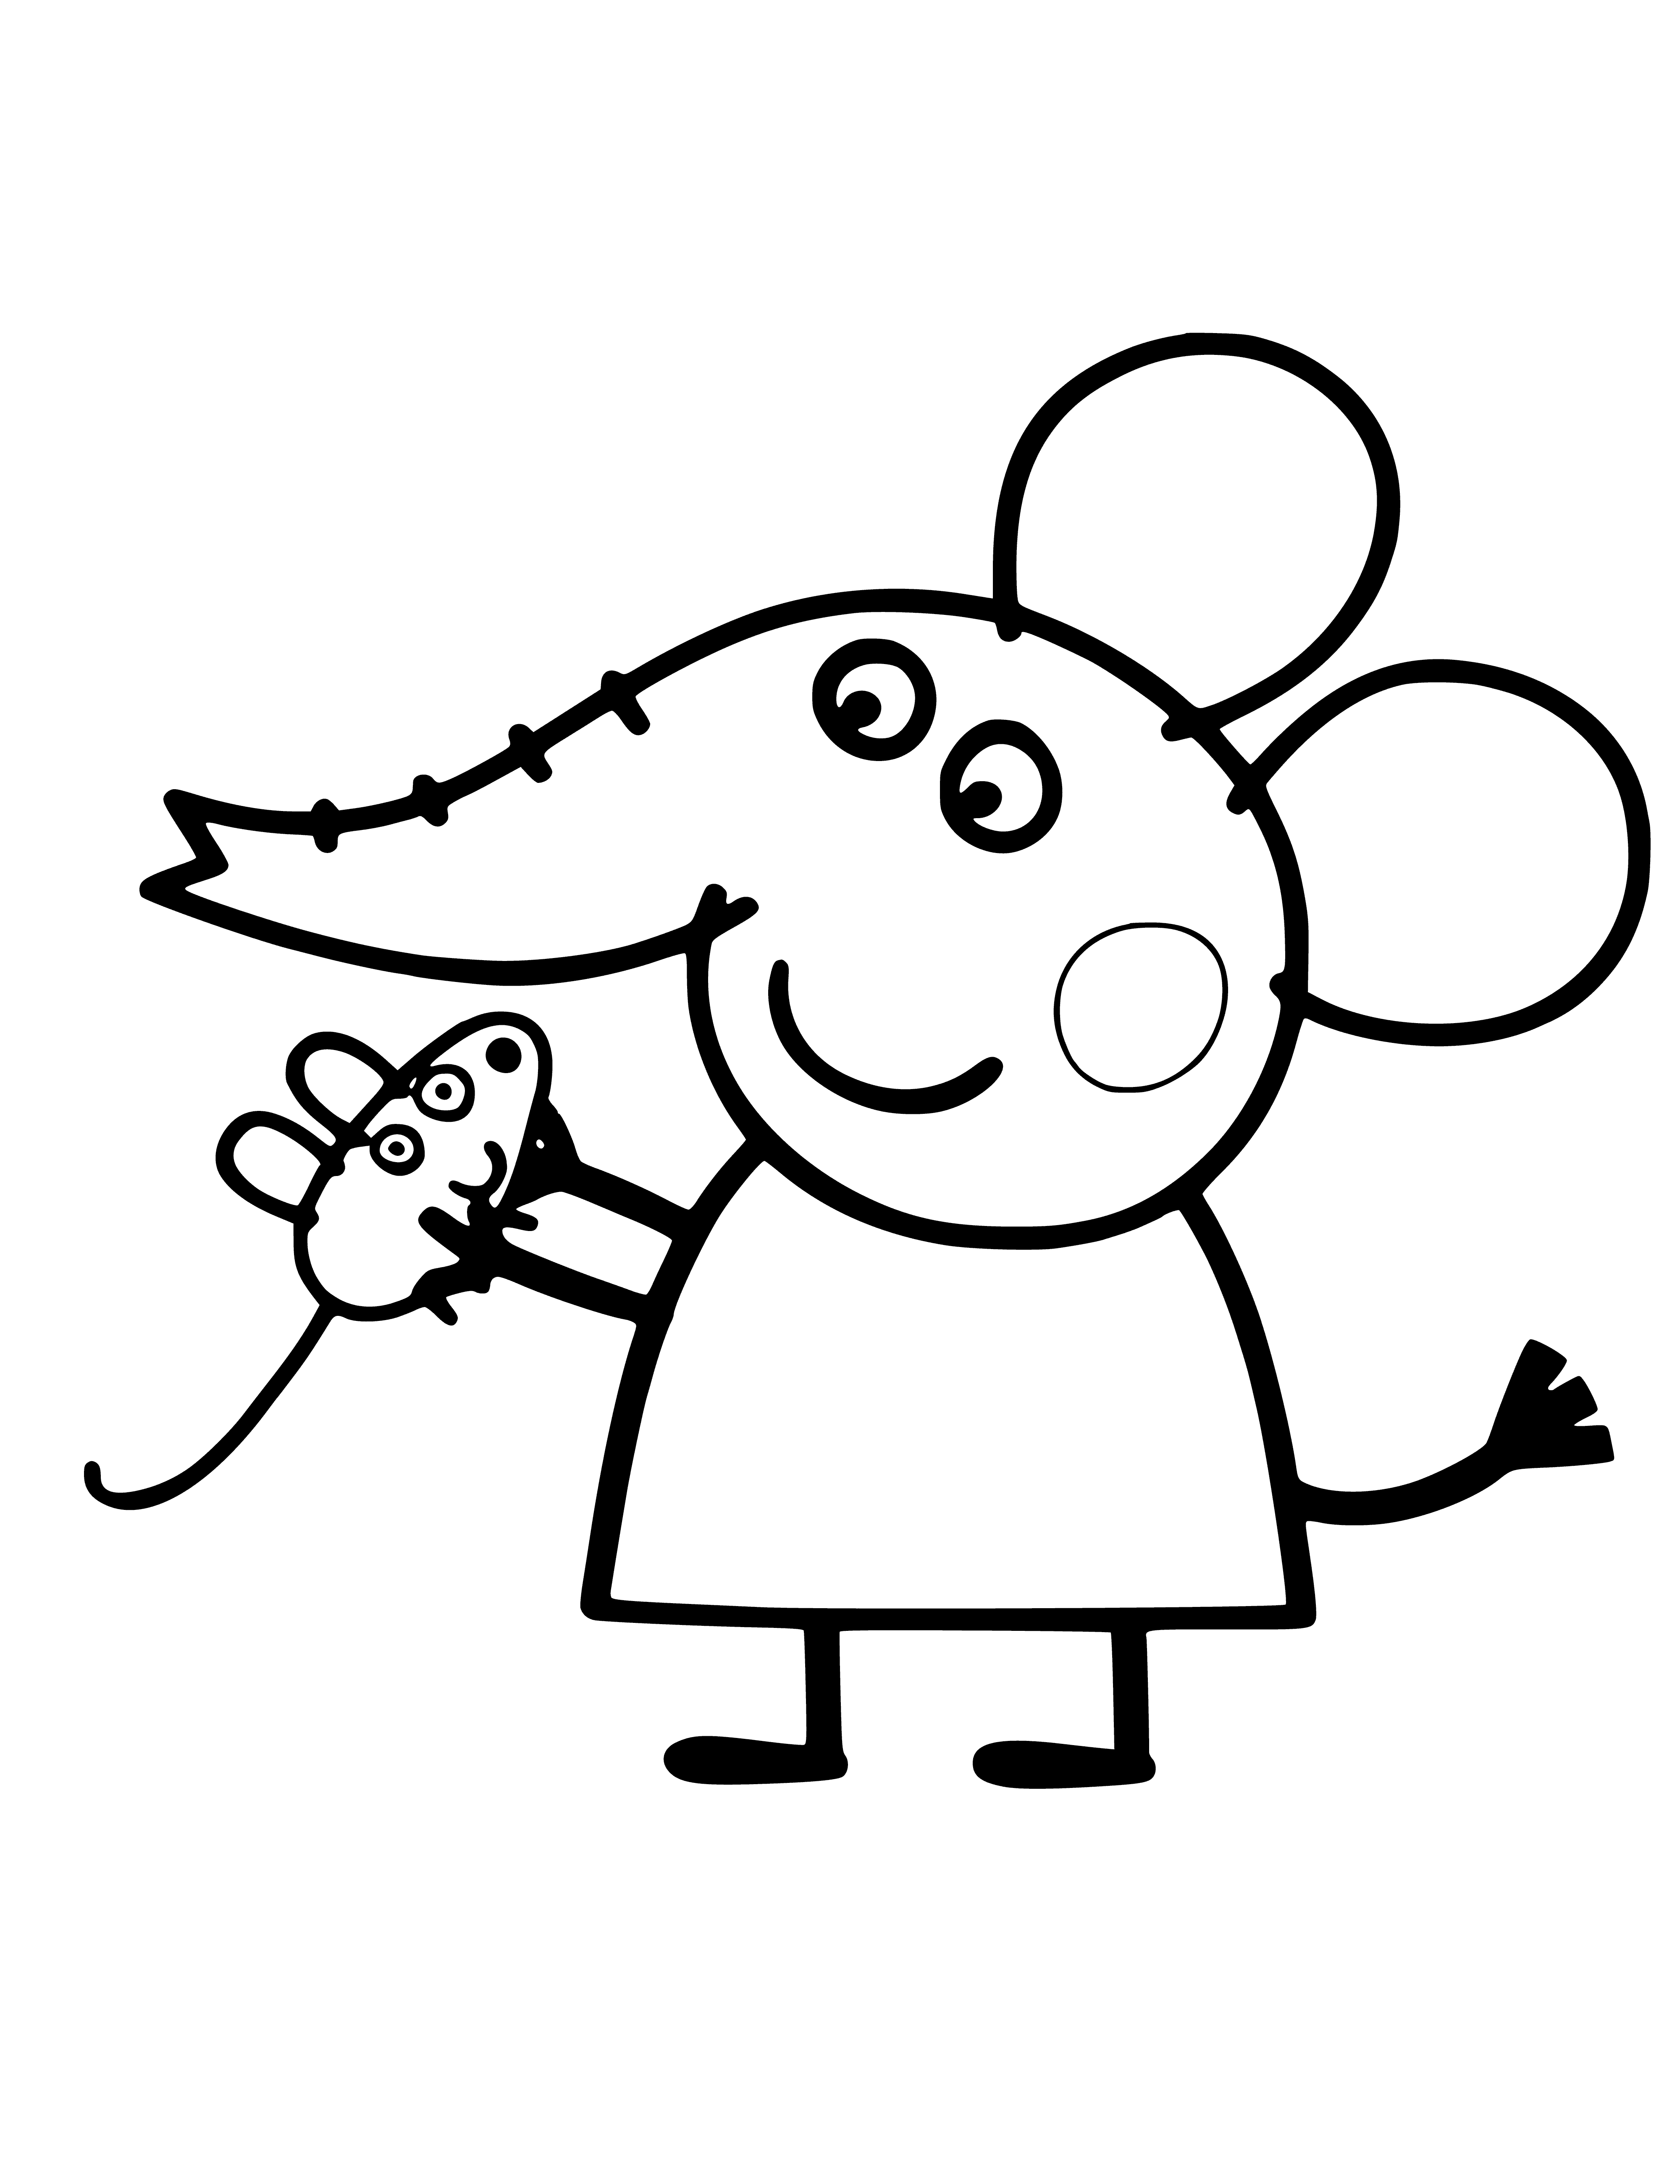 coloring page: Coloring page of baby elephant with mouse on her head, sitting in a pink chair. #PeppaPig #EmilyTheElephant